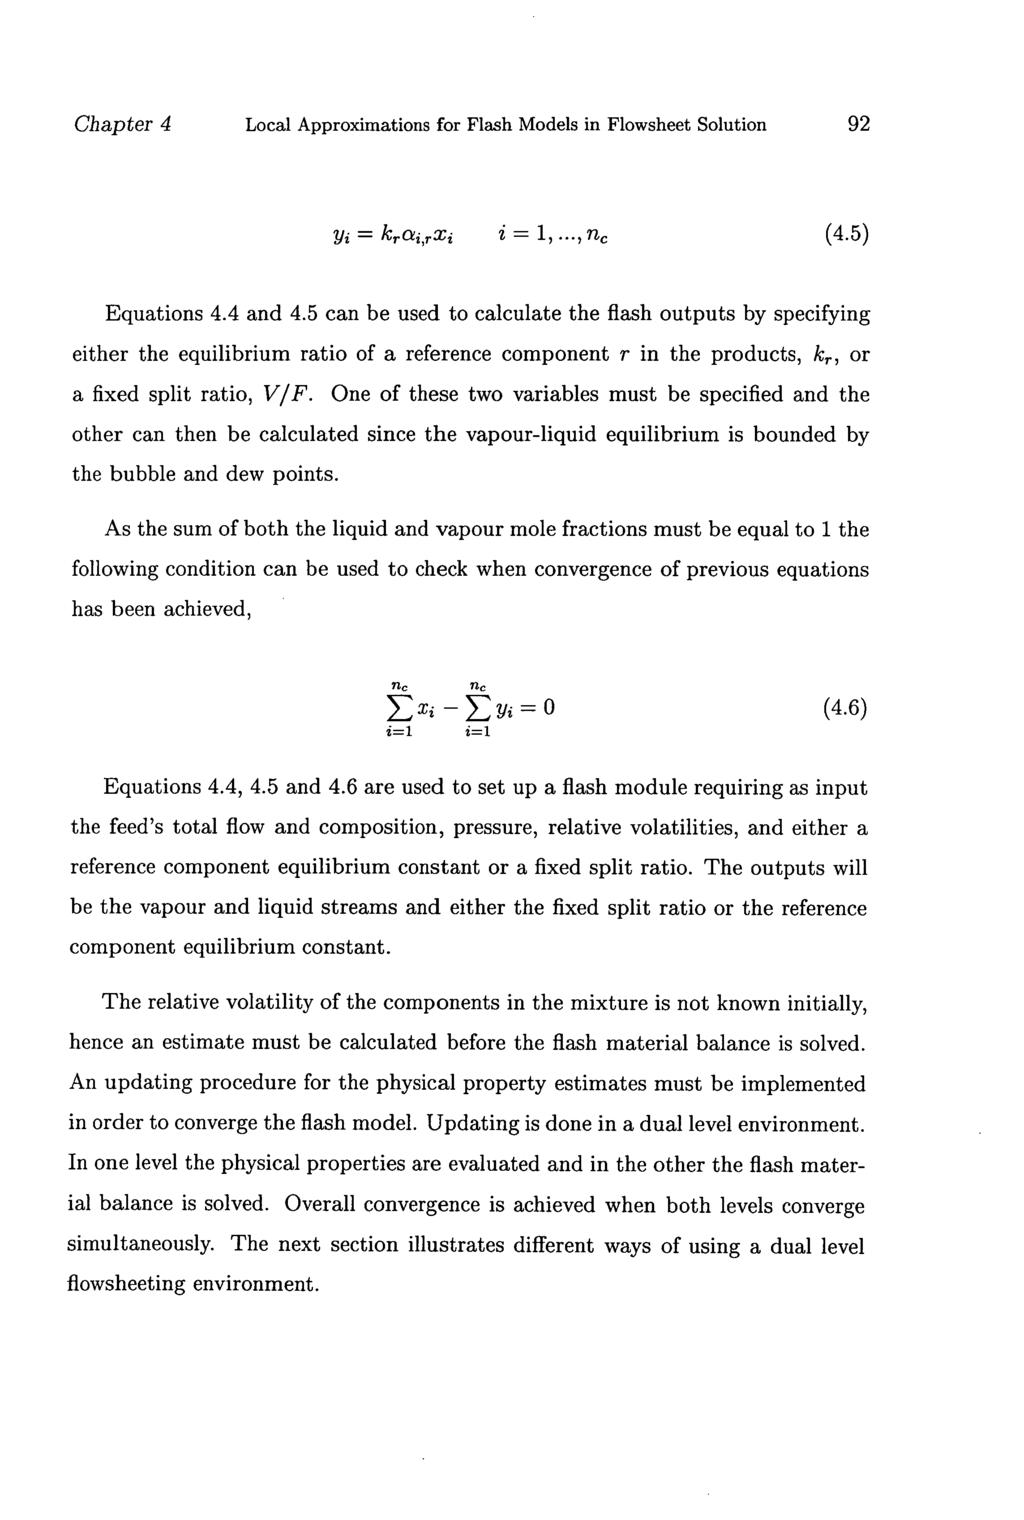 Chapter 4 Local Approximations for Flash Models in Flowsheet Solution 92 7jj = kr i,rxi i = 11..., Tic (4.5) Equations 4.4 and 4.